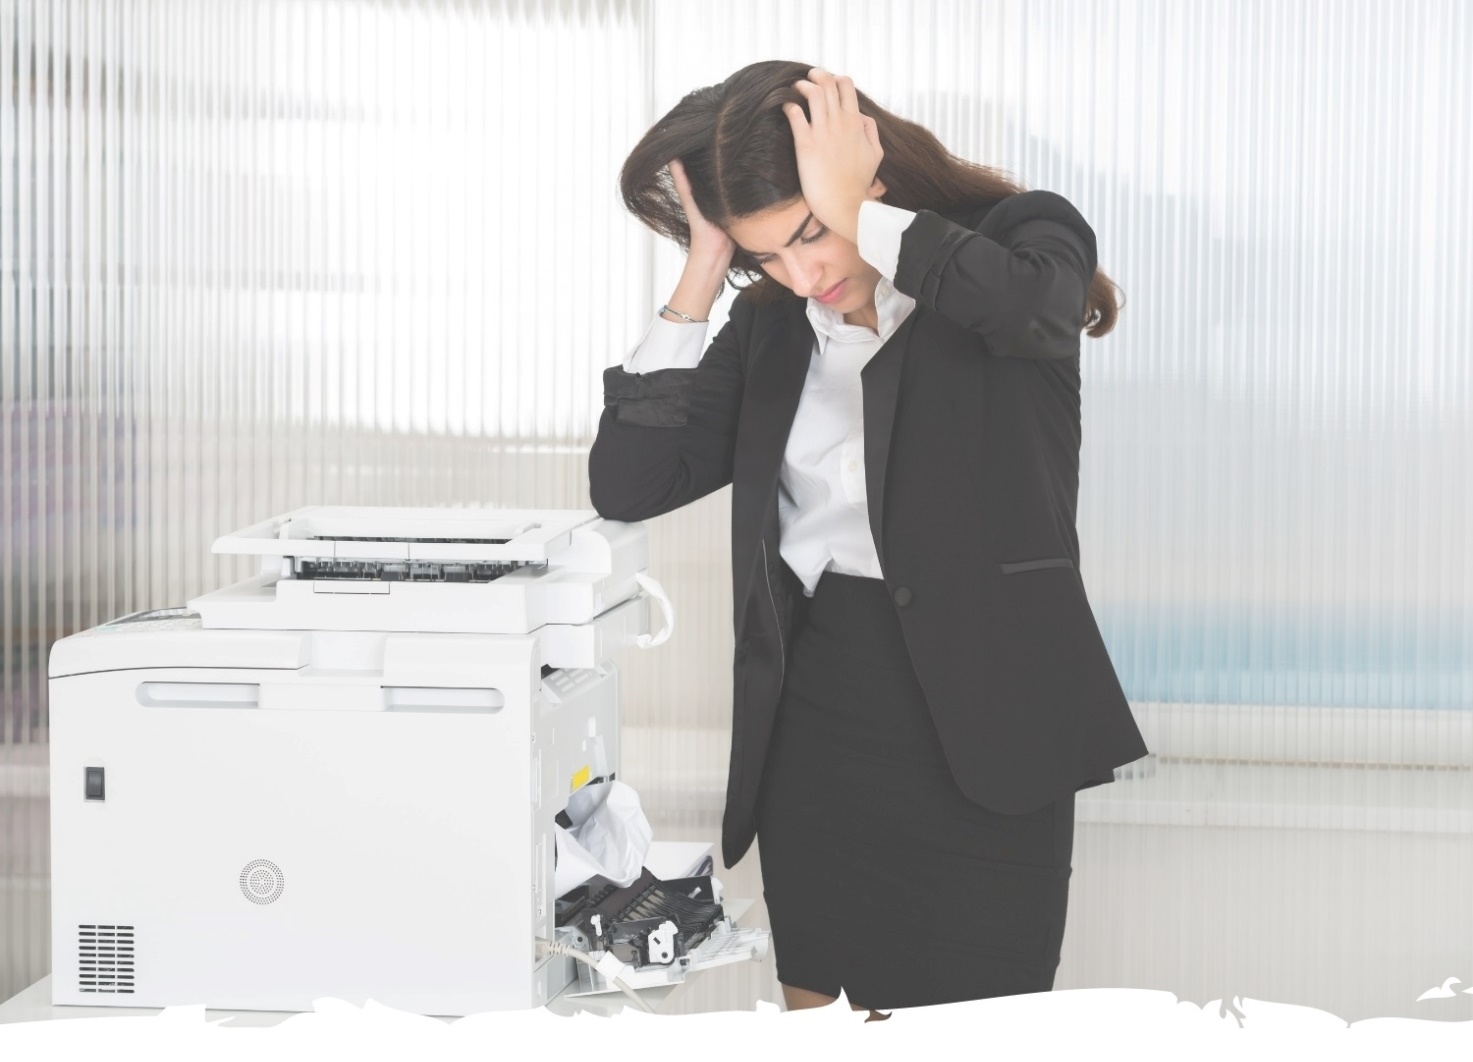 A women holding her head in frustration while looking at a office printer that is jammed.